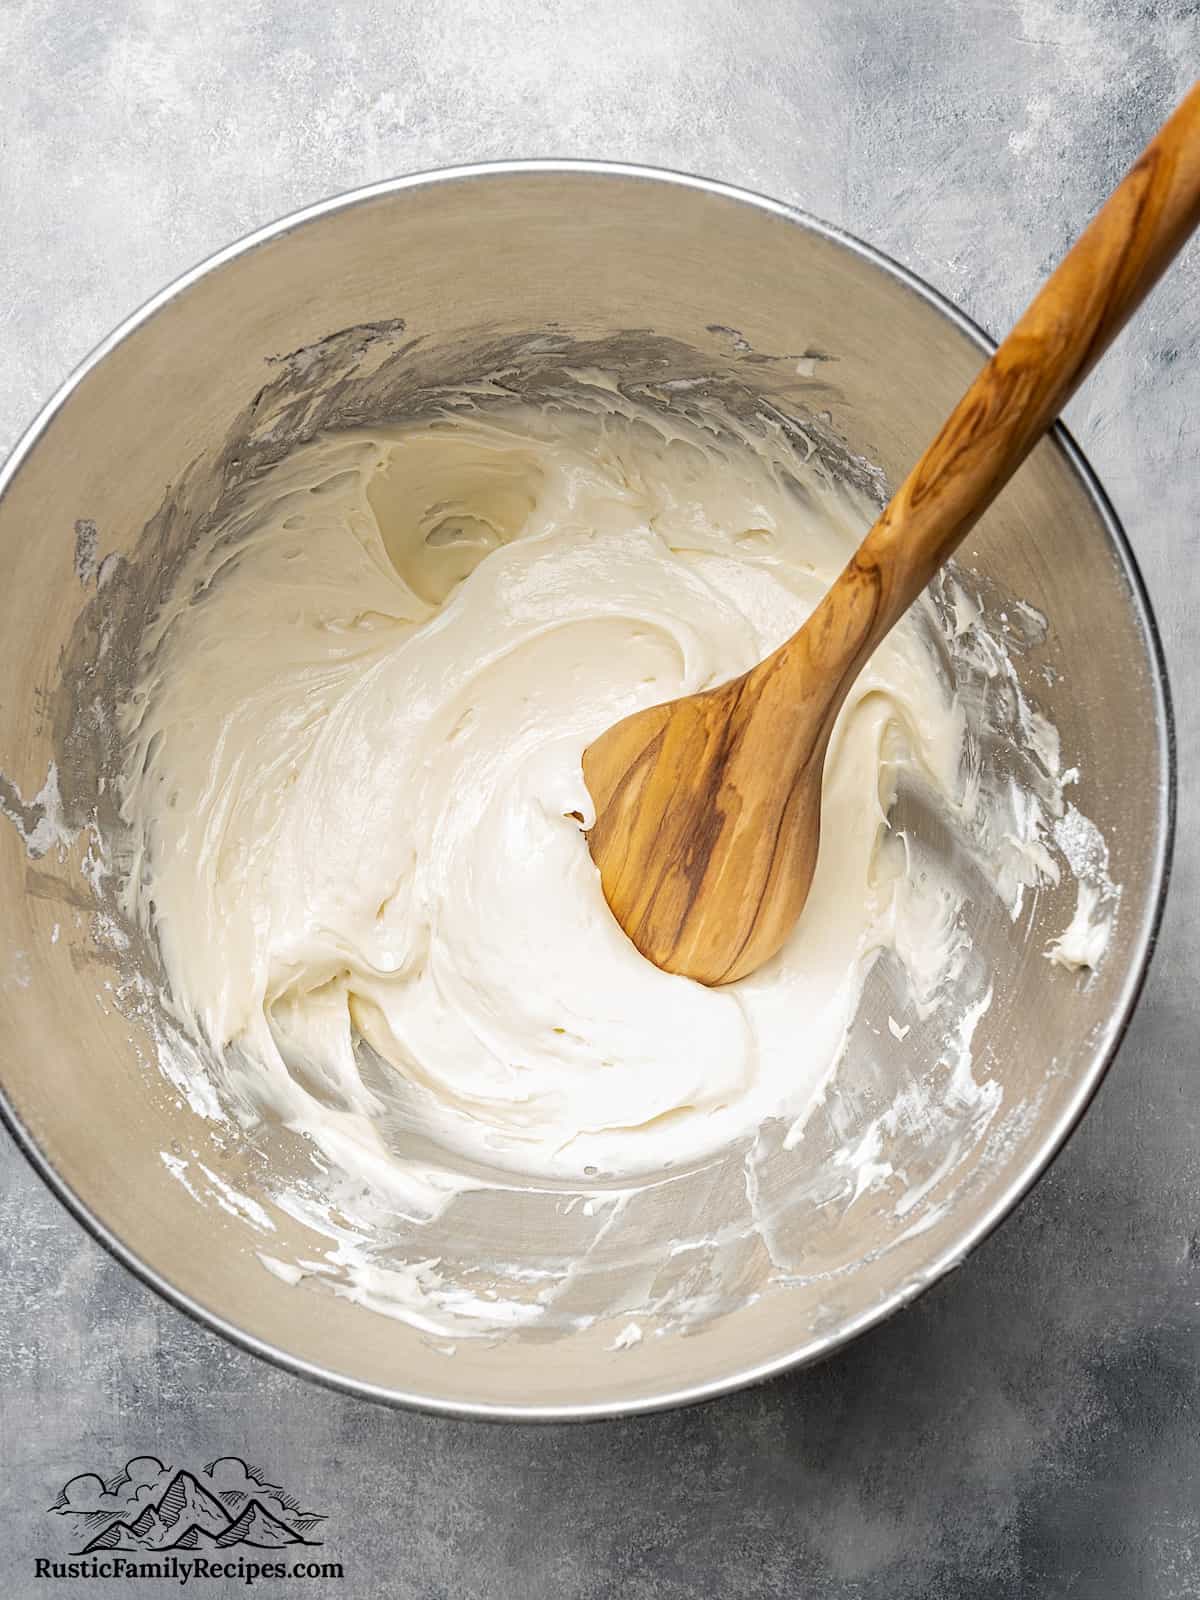 A standing mixer bowl with meringue being made and a wooden spoon